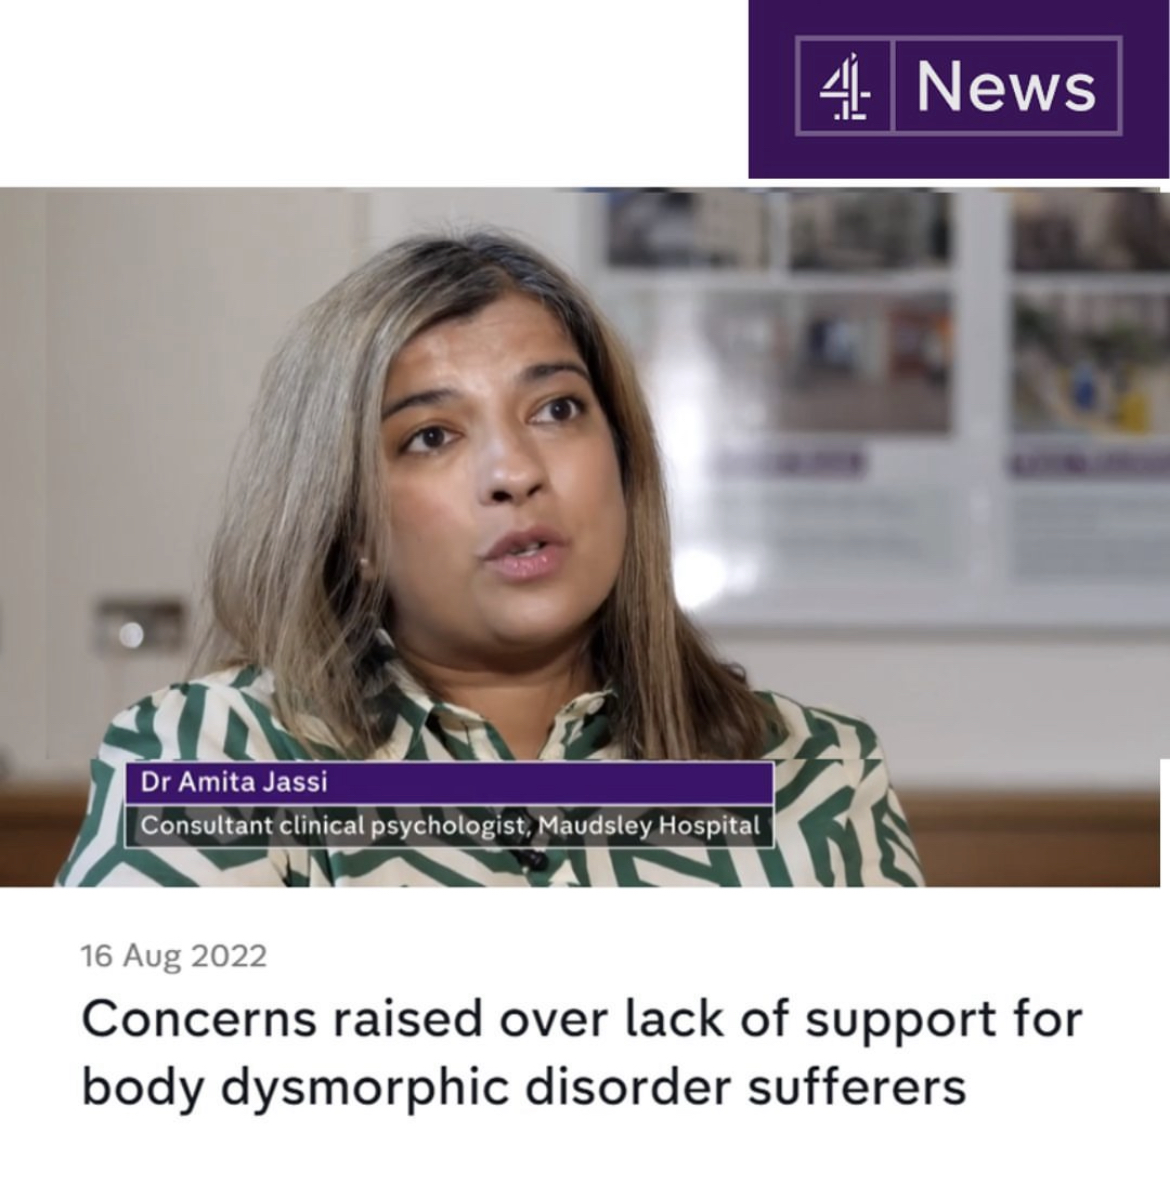 Channel 4 – concerns over lack of support for those with BDD